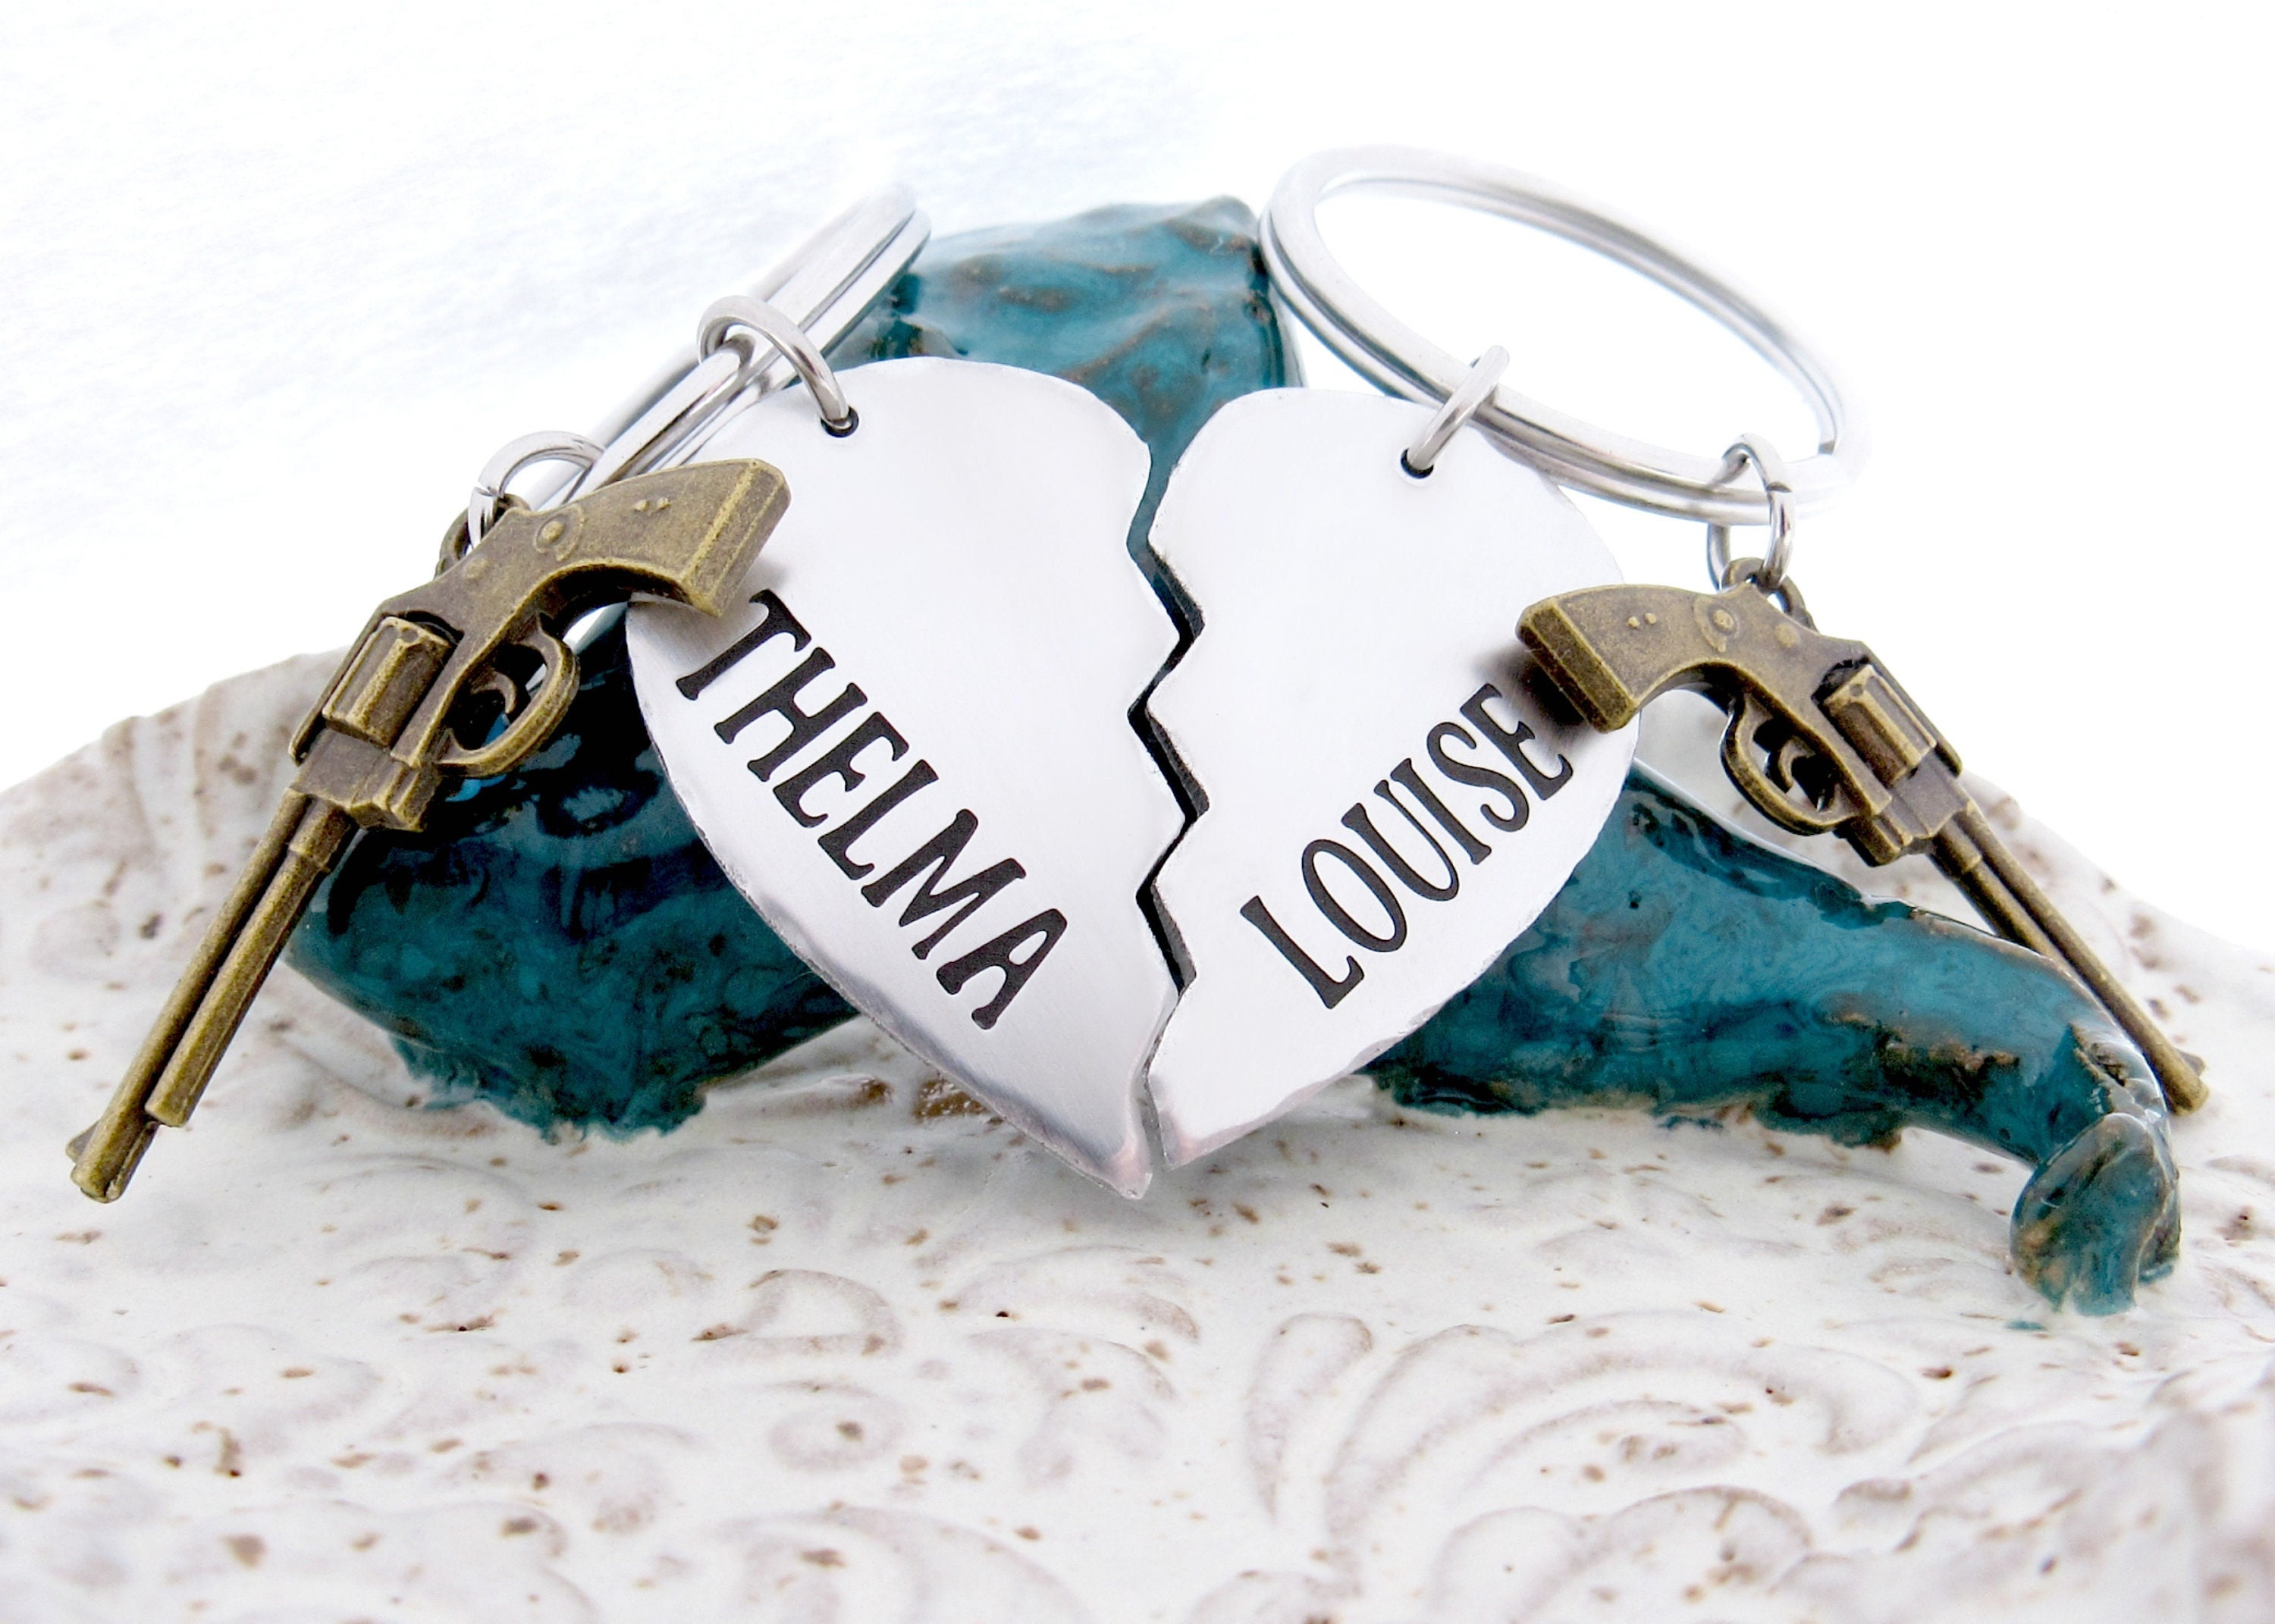 Art Attack Thelma & Louise Bonnie & Clyde Gun Revolver BFF Best Friends  Broken Heart Partners in Crime Bandit Bag Charm Pendant Keychain (Thelma &  Louise) 